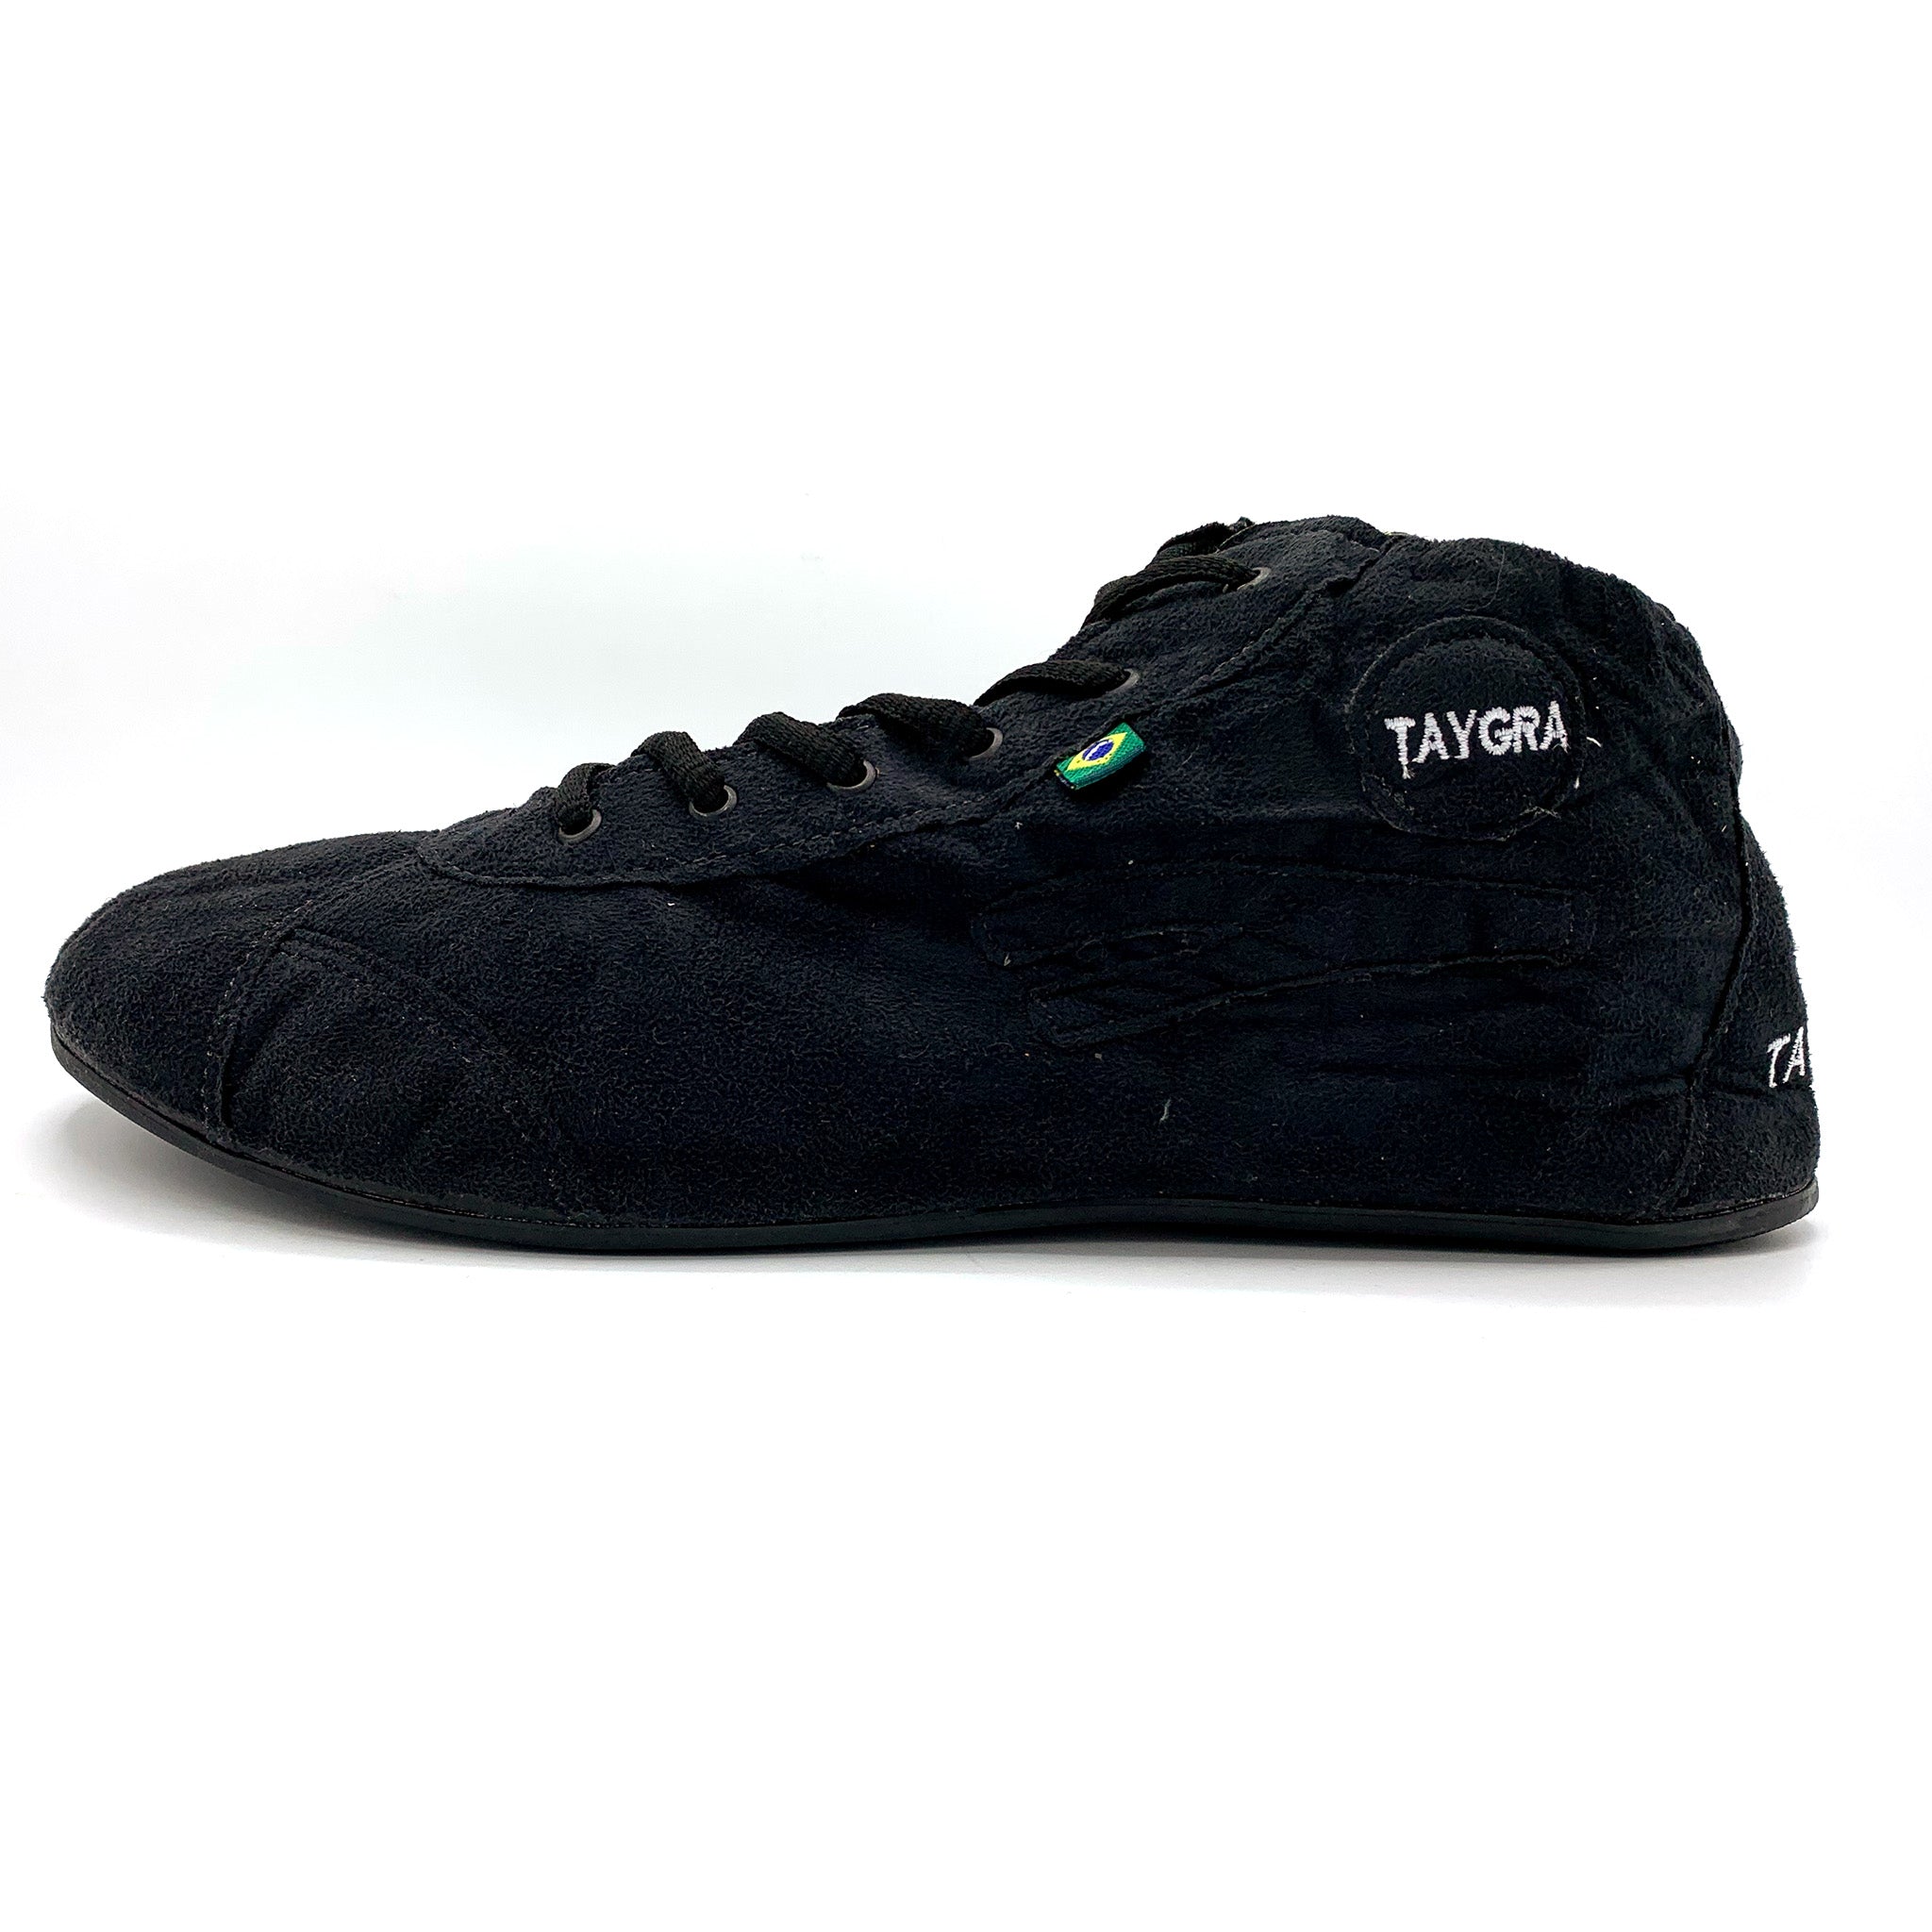 Taygra Shoes Mid-Top Black Suede Side